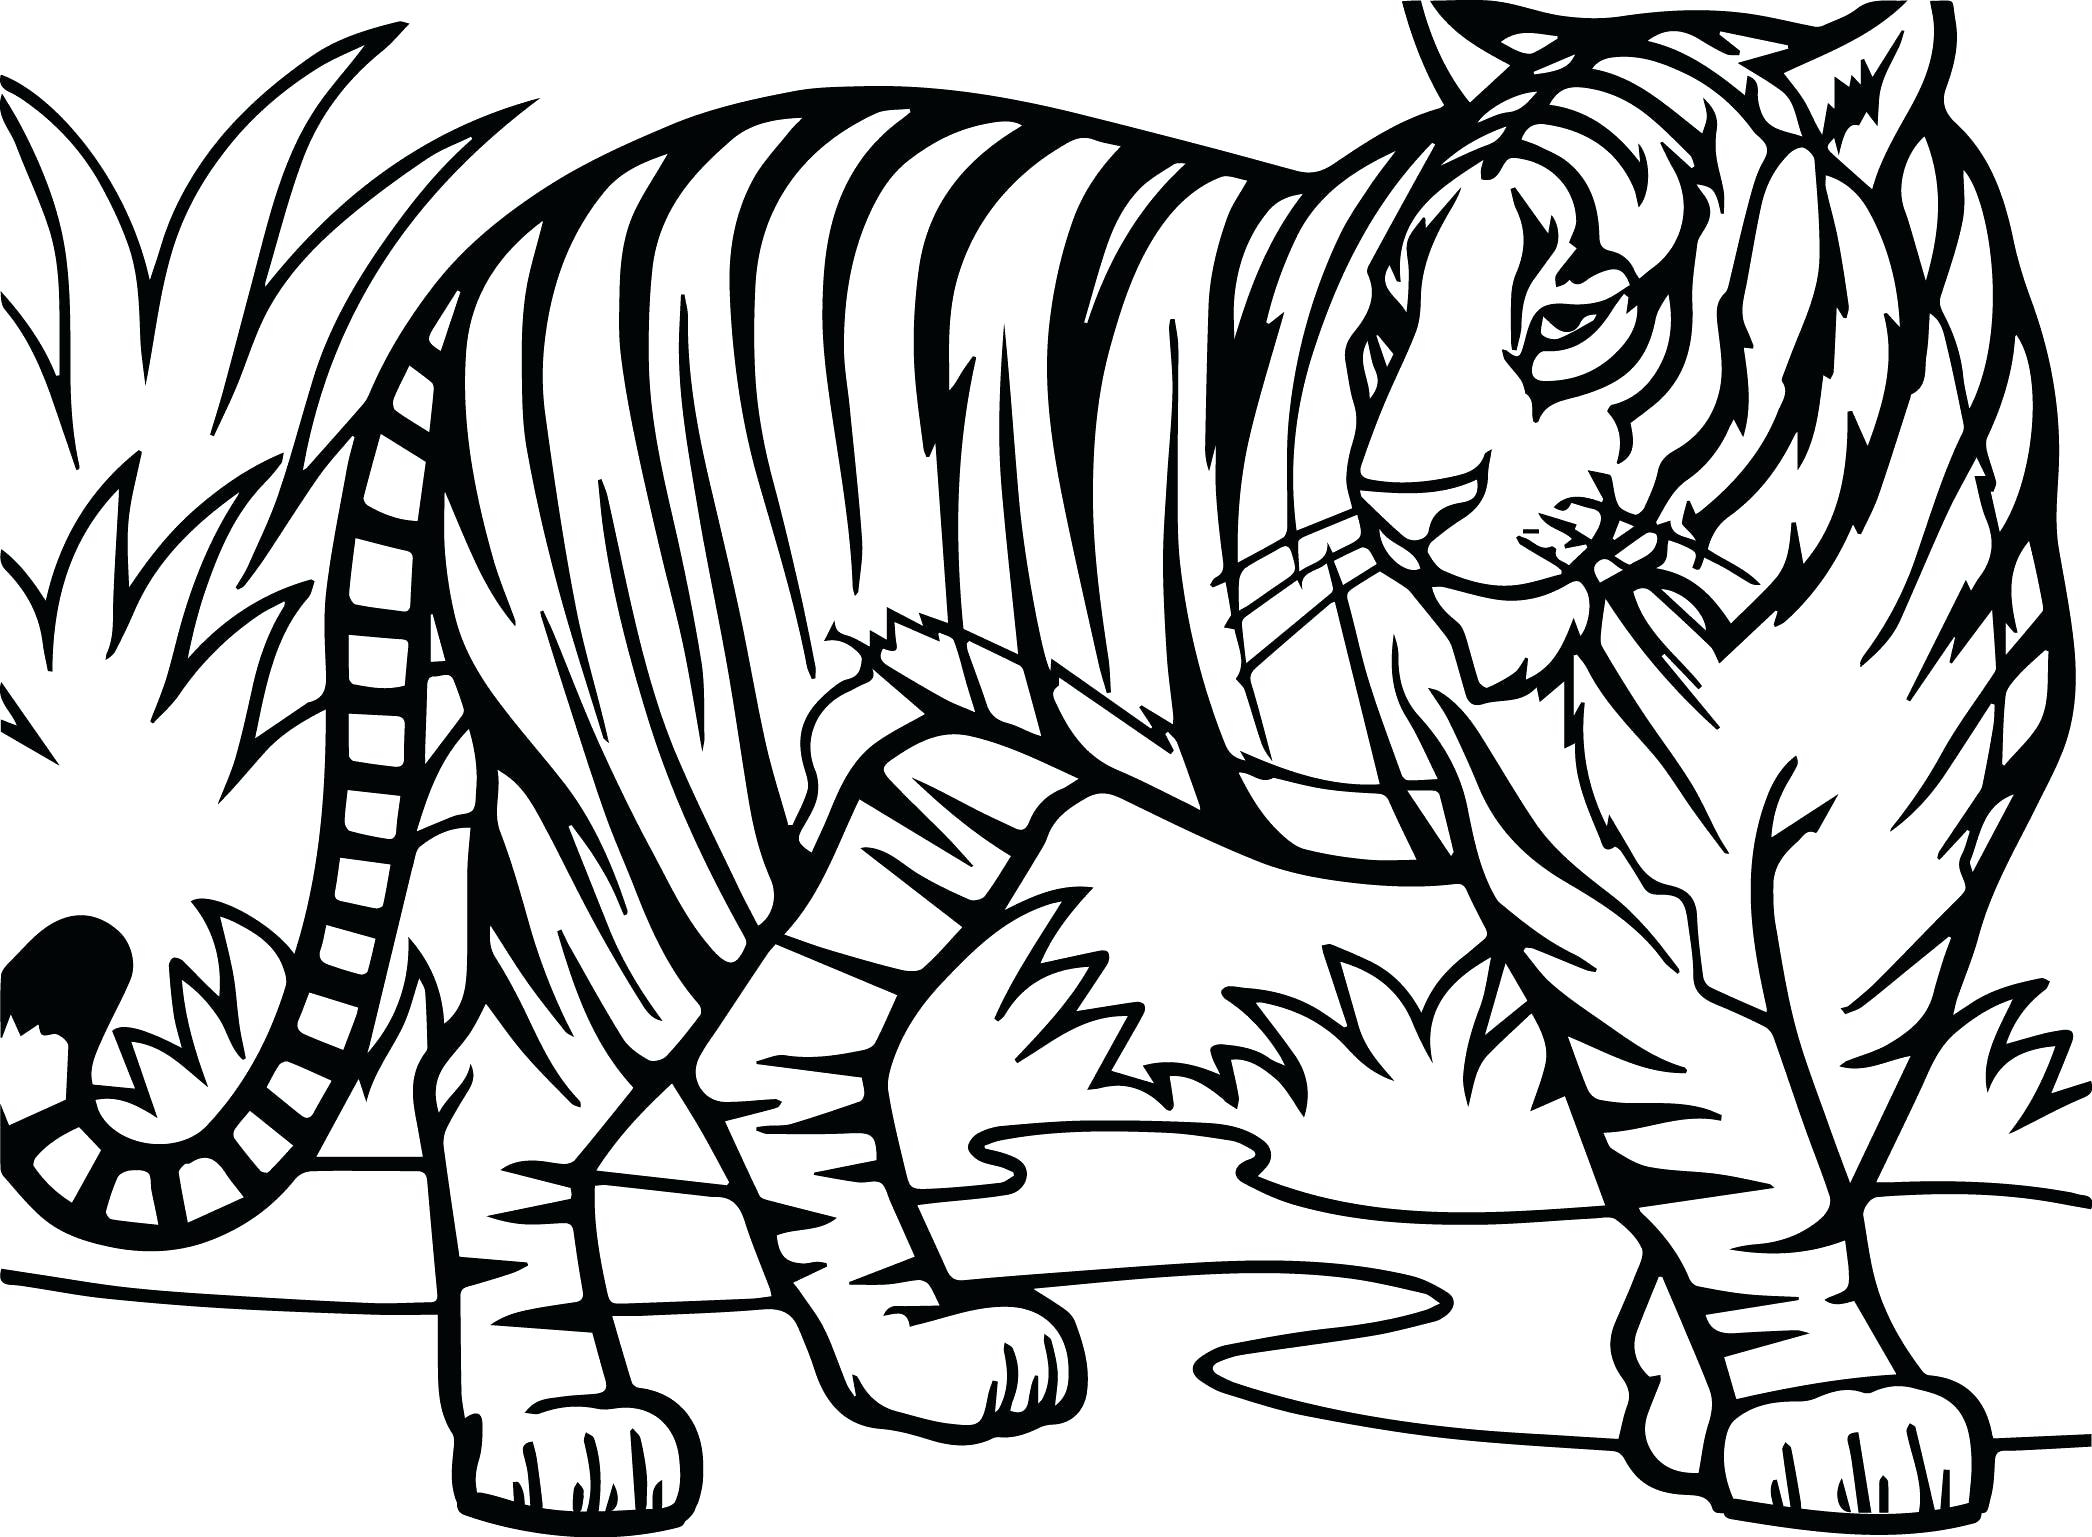 Coloring Pages Of Cute Tigers Free Tiger Cub Coloring Pages Brotherprintco